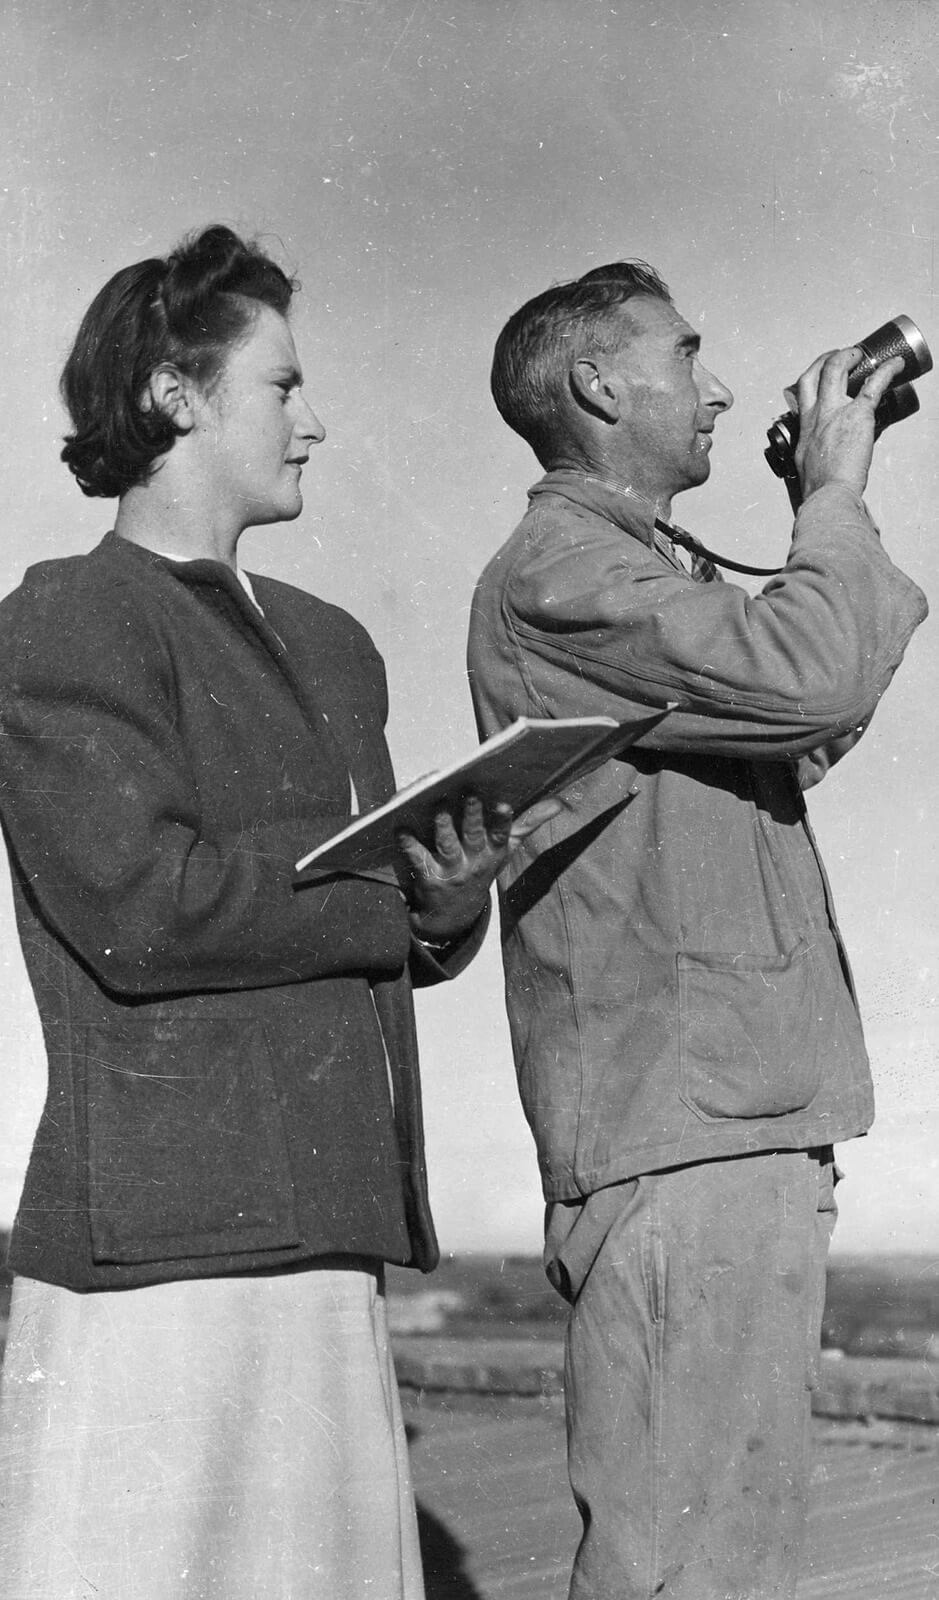 Black and white photograph shows 2 people. On the left is a woman with short curled hair. She is wearing a dark jacket over a pale skirt, and holding a paper notebook open. To the right is a man holding binoculars as if putting them to his eyes, or taking them away. He is wearing worn work-mans jacket and pants. 